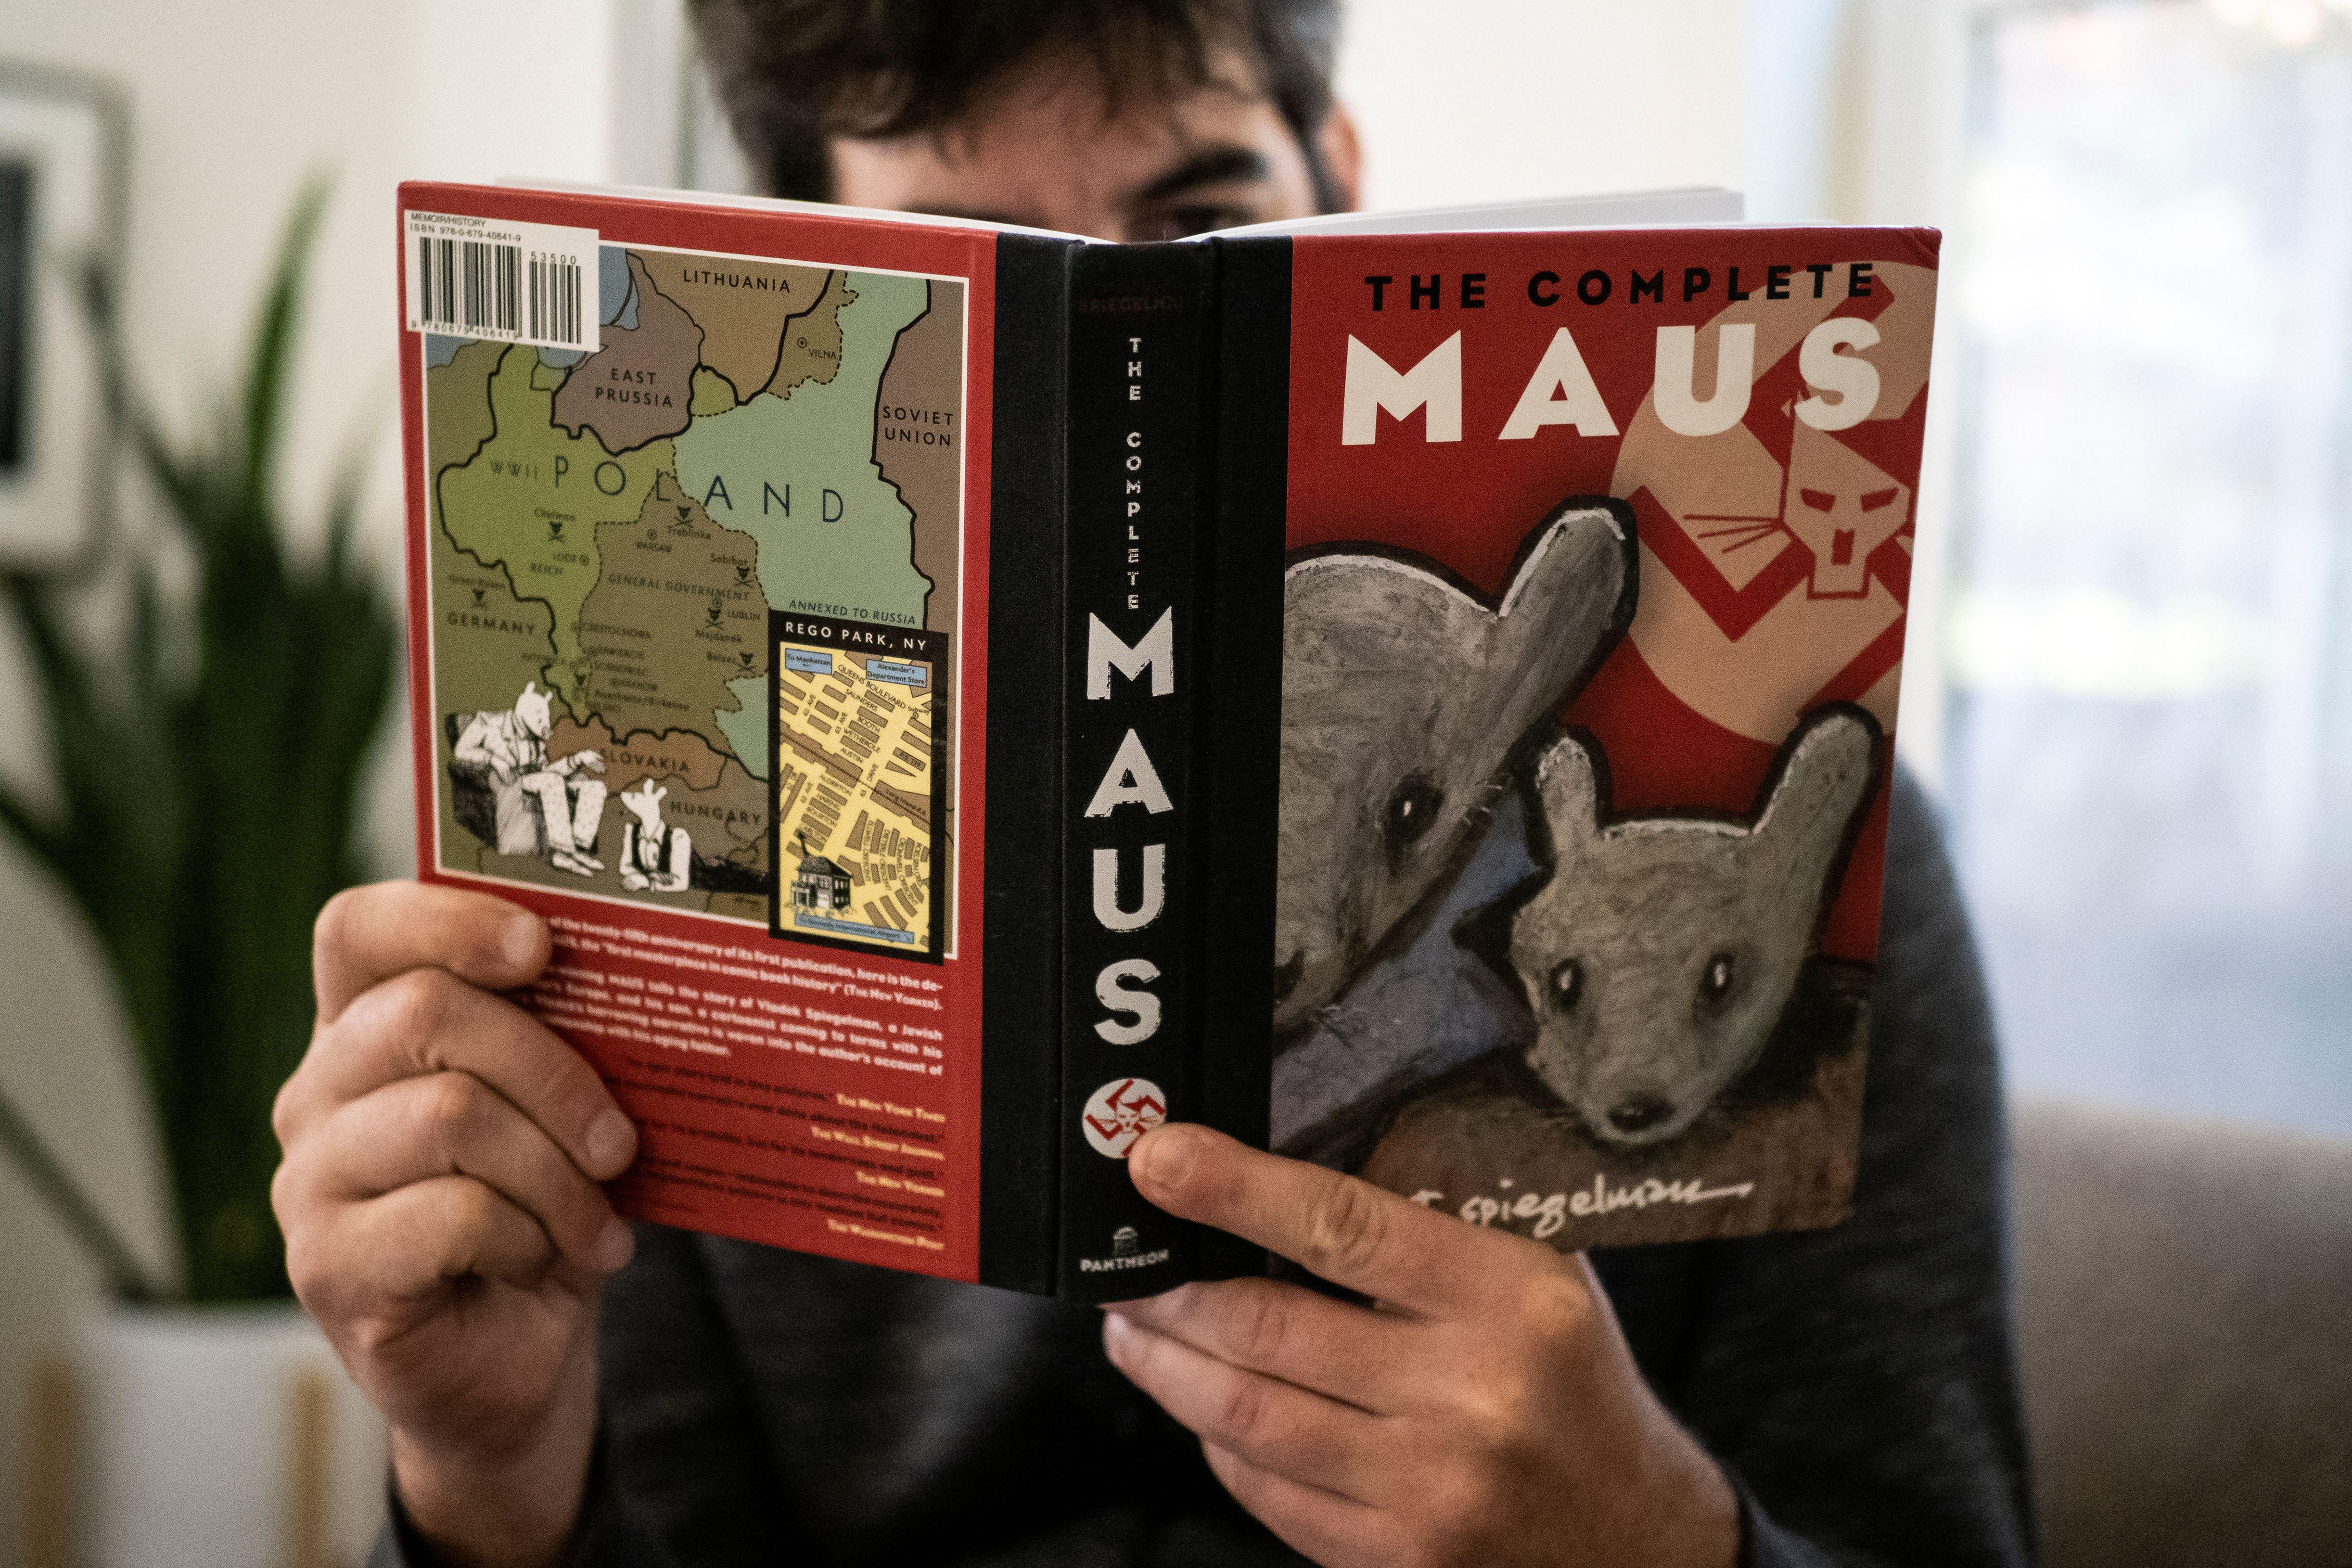 A person's hands holding up the book, Maus, with the front cover featuring a pair of mice and a swastika